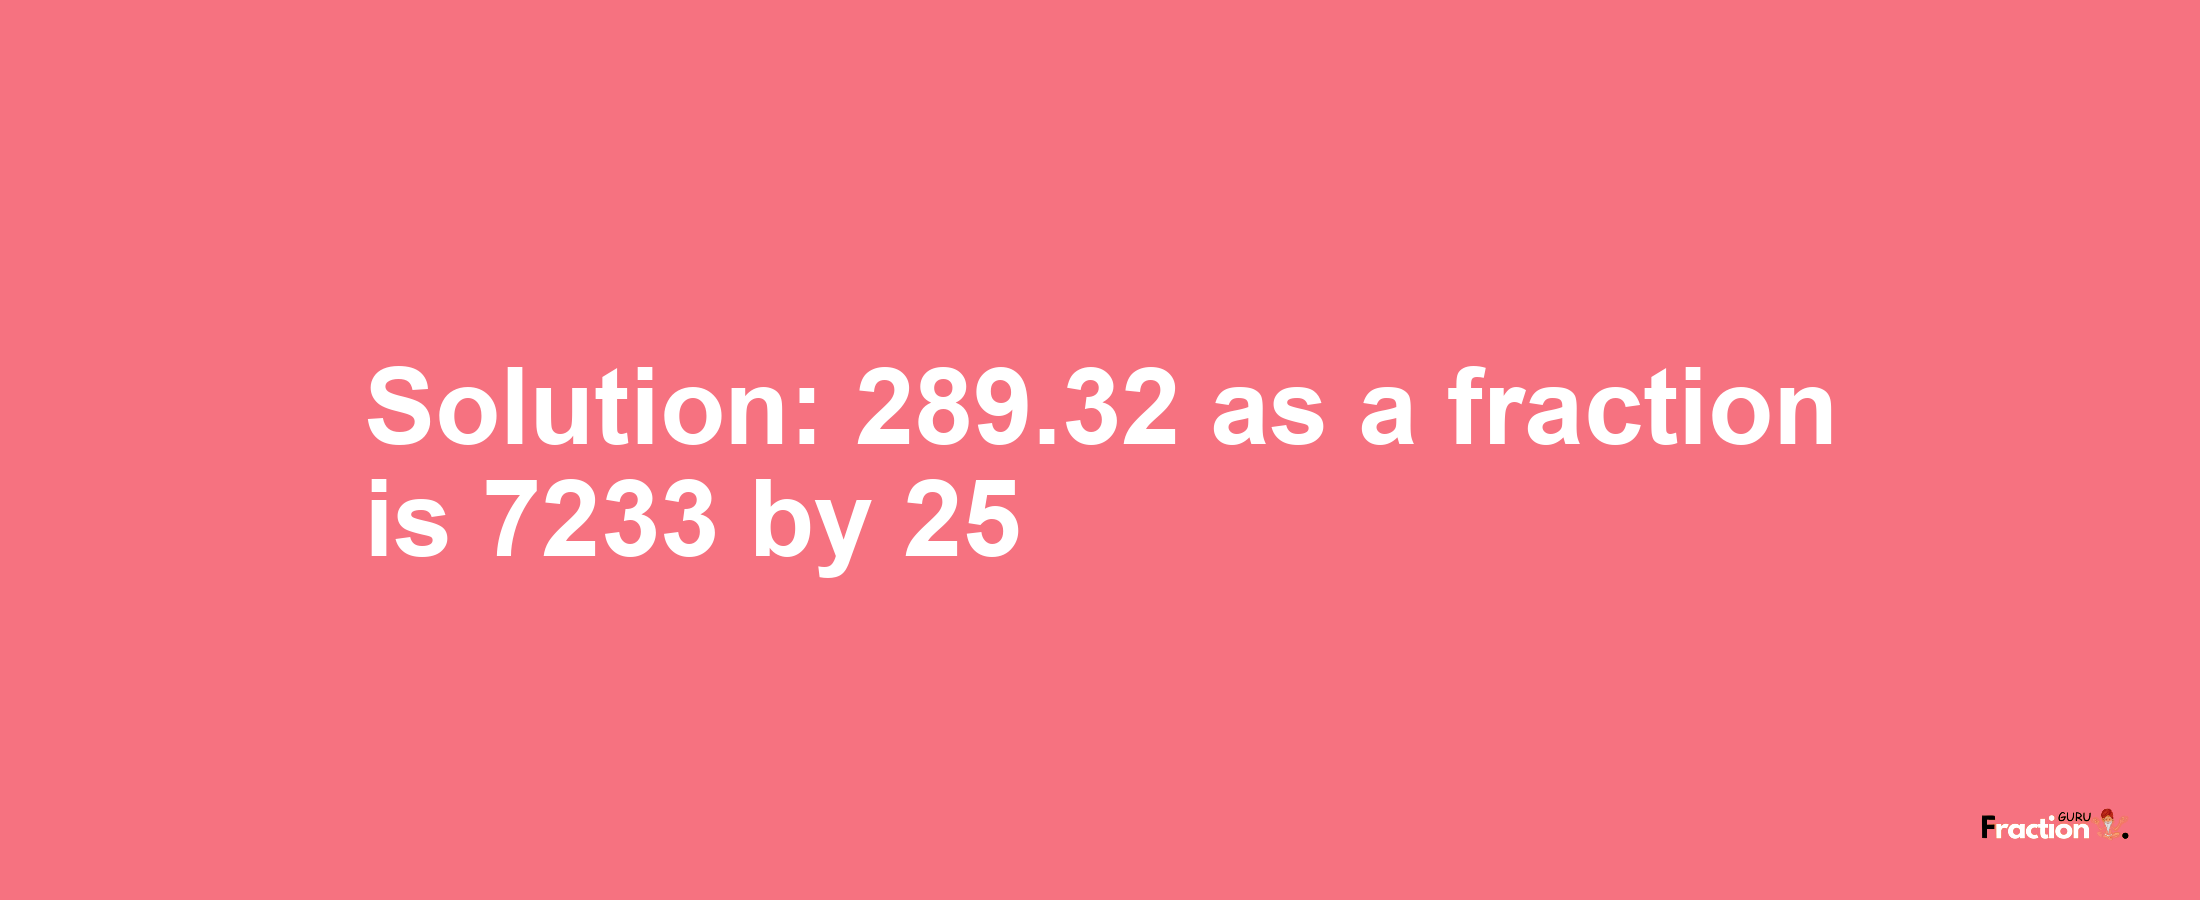 Solution:289.32 as a fraction is 7233/25